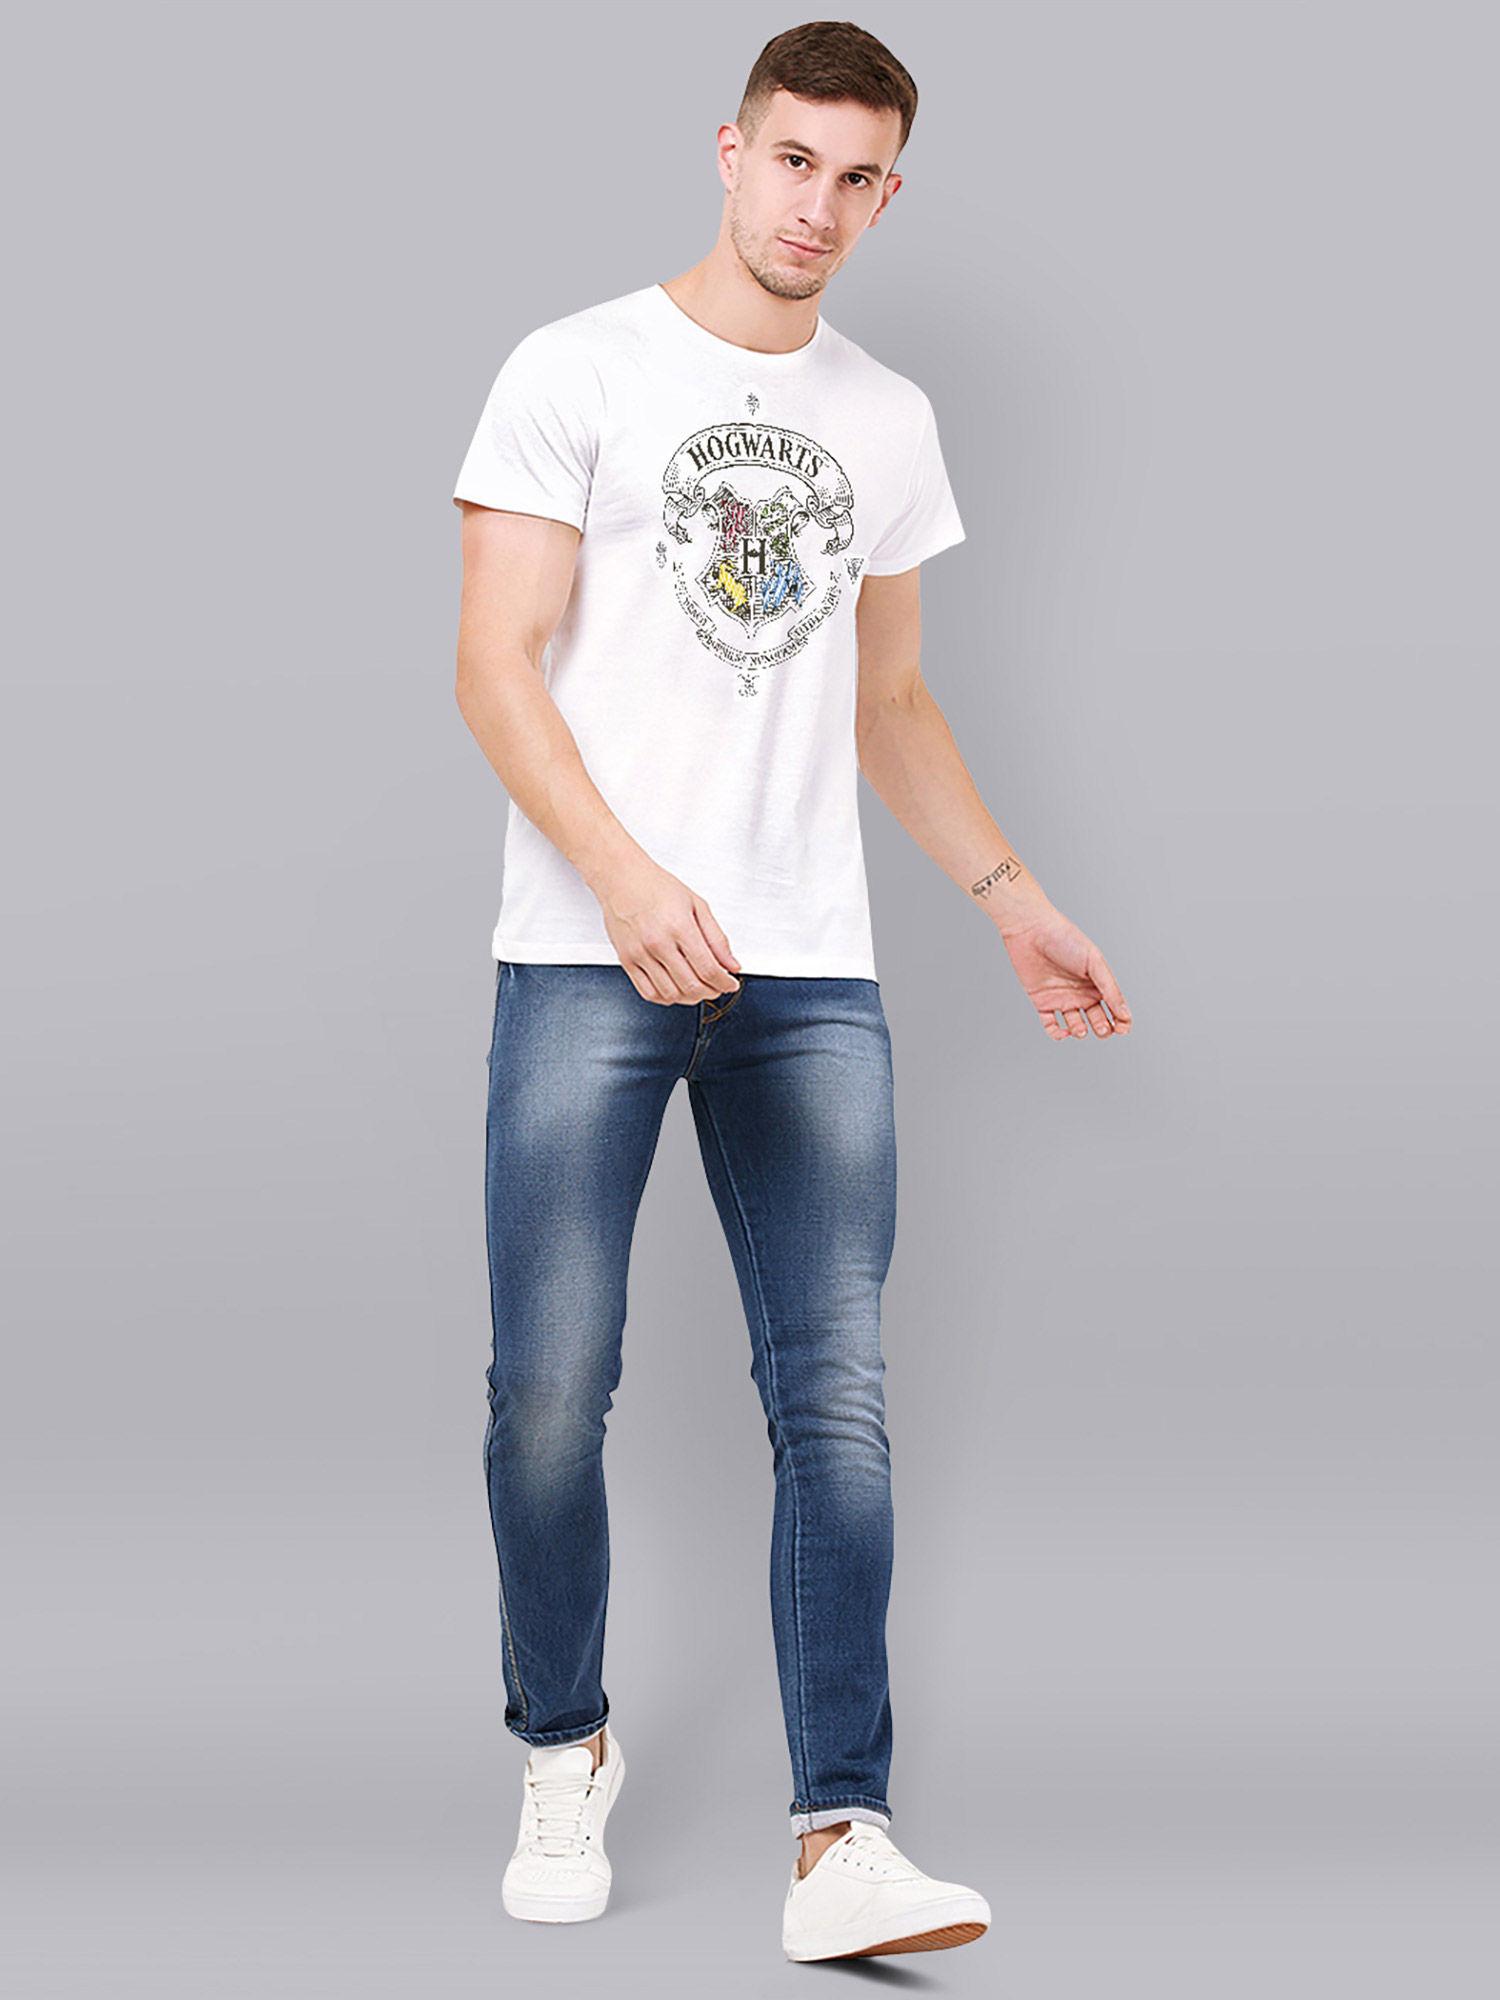 harry potter featured white tshirt for men